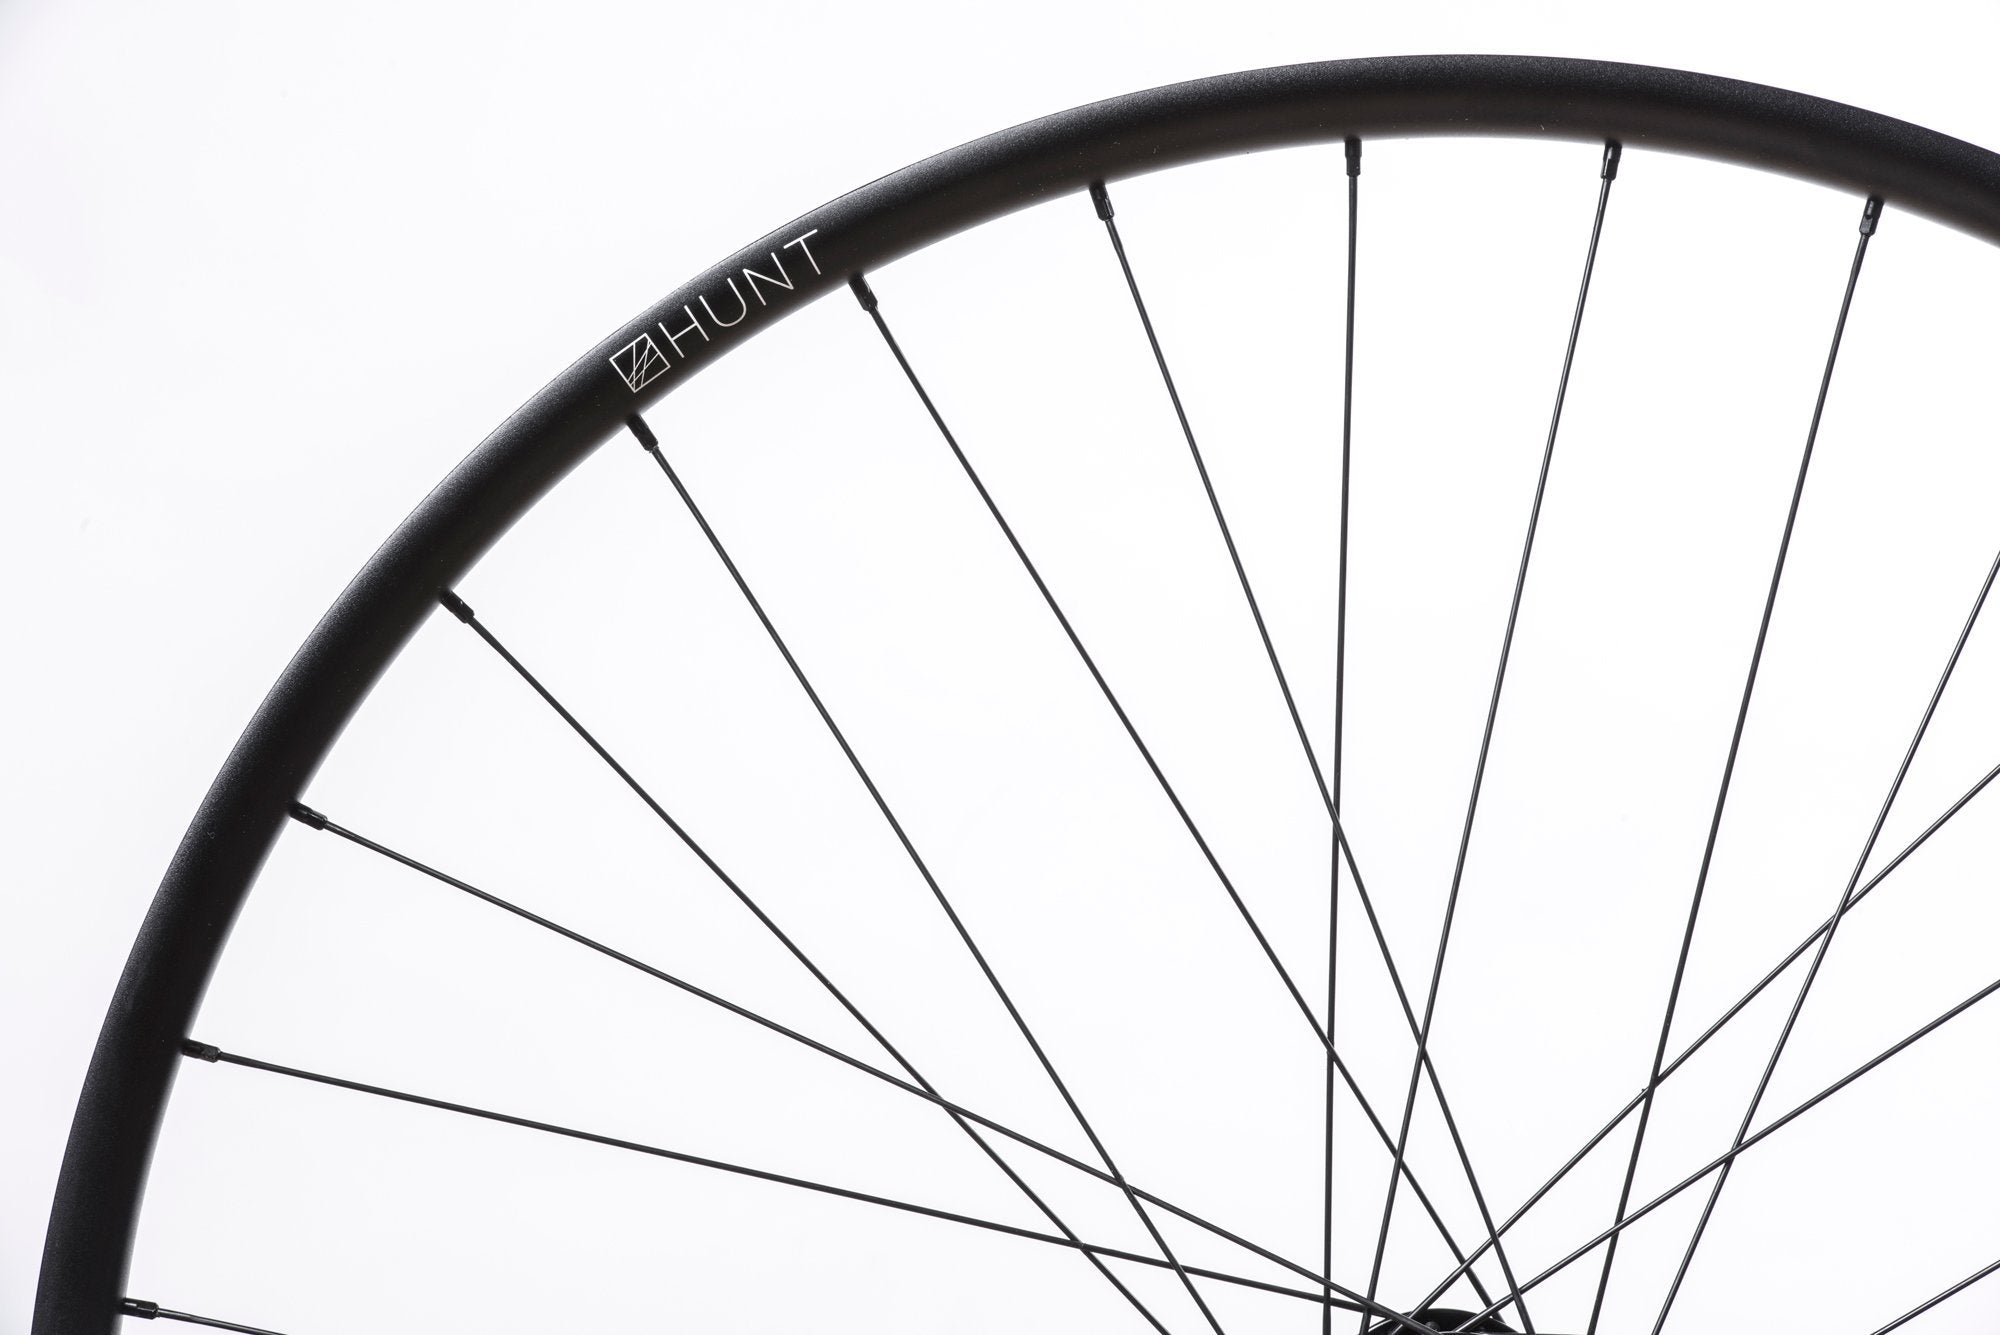 <h1>Rims</h1><i>The Search 29 rim includes details which are high on the durability factor to make sure you finish every ride with a big grin. The 6069-T6  (+69% tensile strength vs 6061-T6) alloy rim sticks with the wider-is-better mantra. Designed for 2.3"-2.5" tires, the wide 30mm (internal) rim provides support to the tire during hard cornering, landing in a root strewn shoot or when your throttling down a high-speed section and folding a tire is the last thing you need to happen!</i>